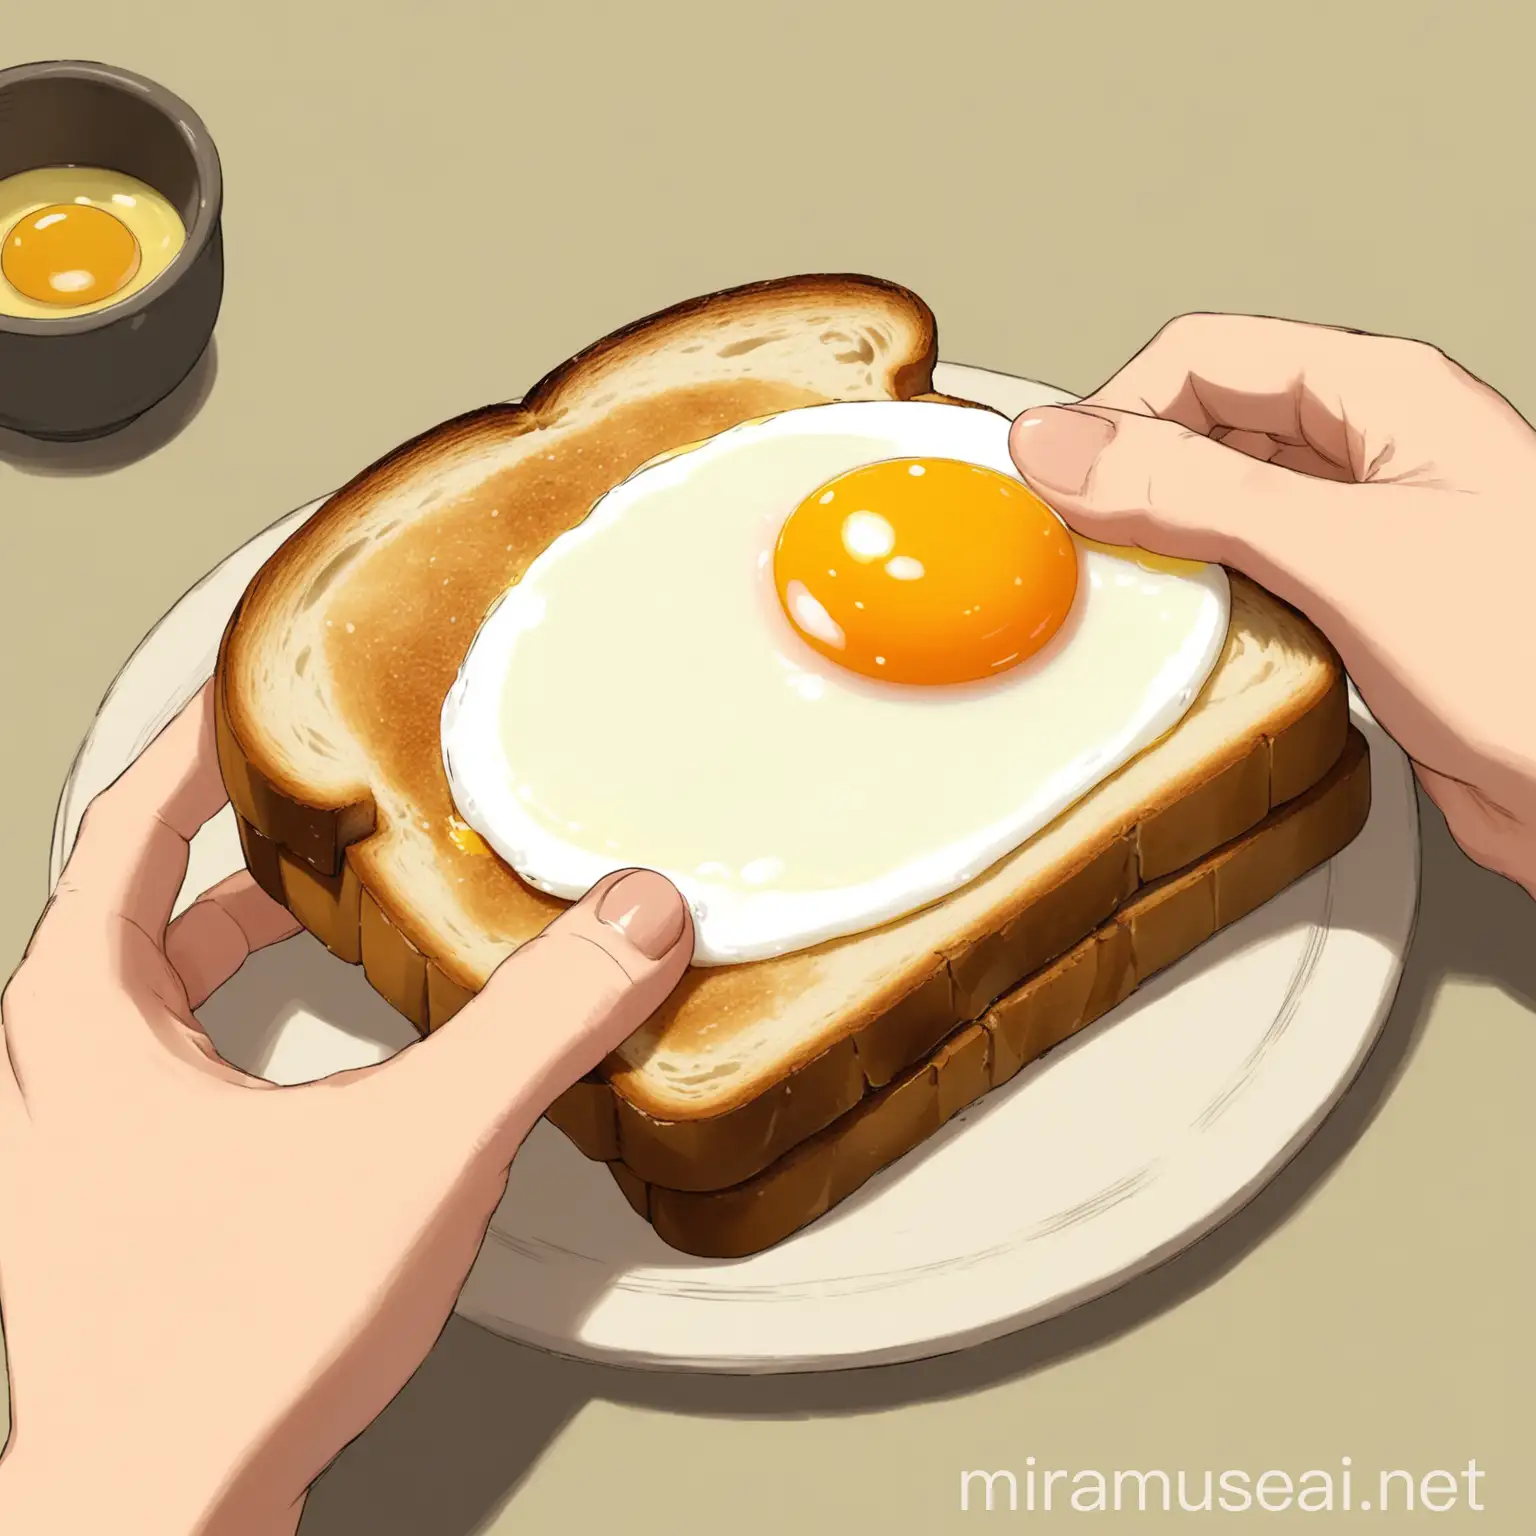  In the style of Ghibli studio, a pair of hands holds a thick slice of toast with a egg on top.
